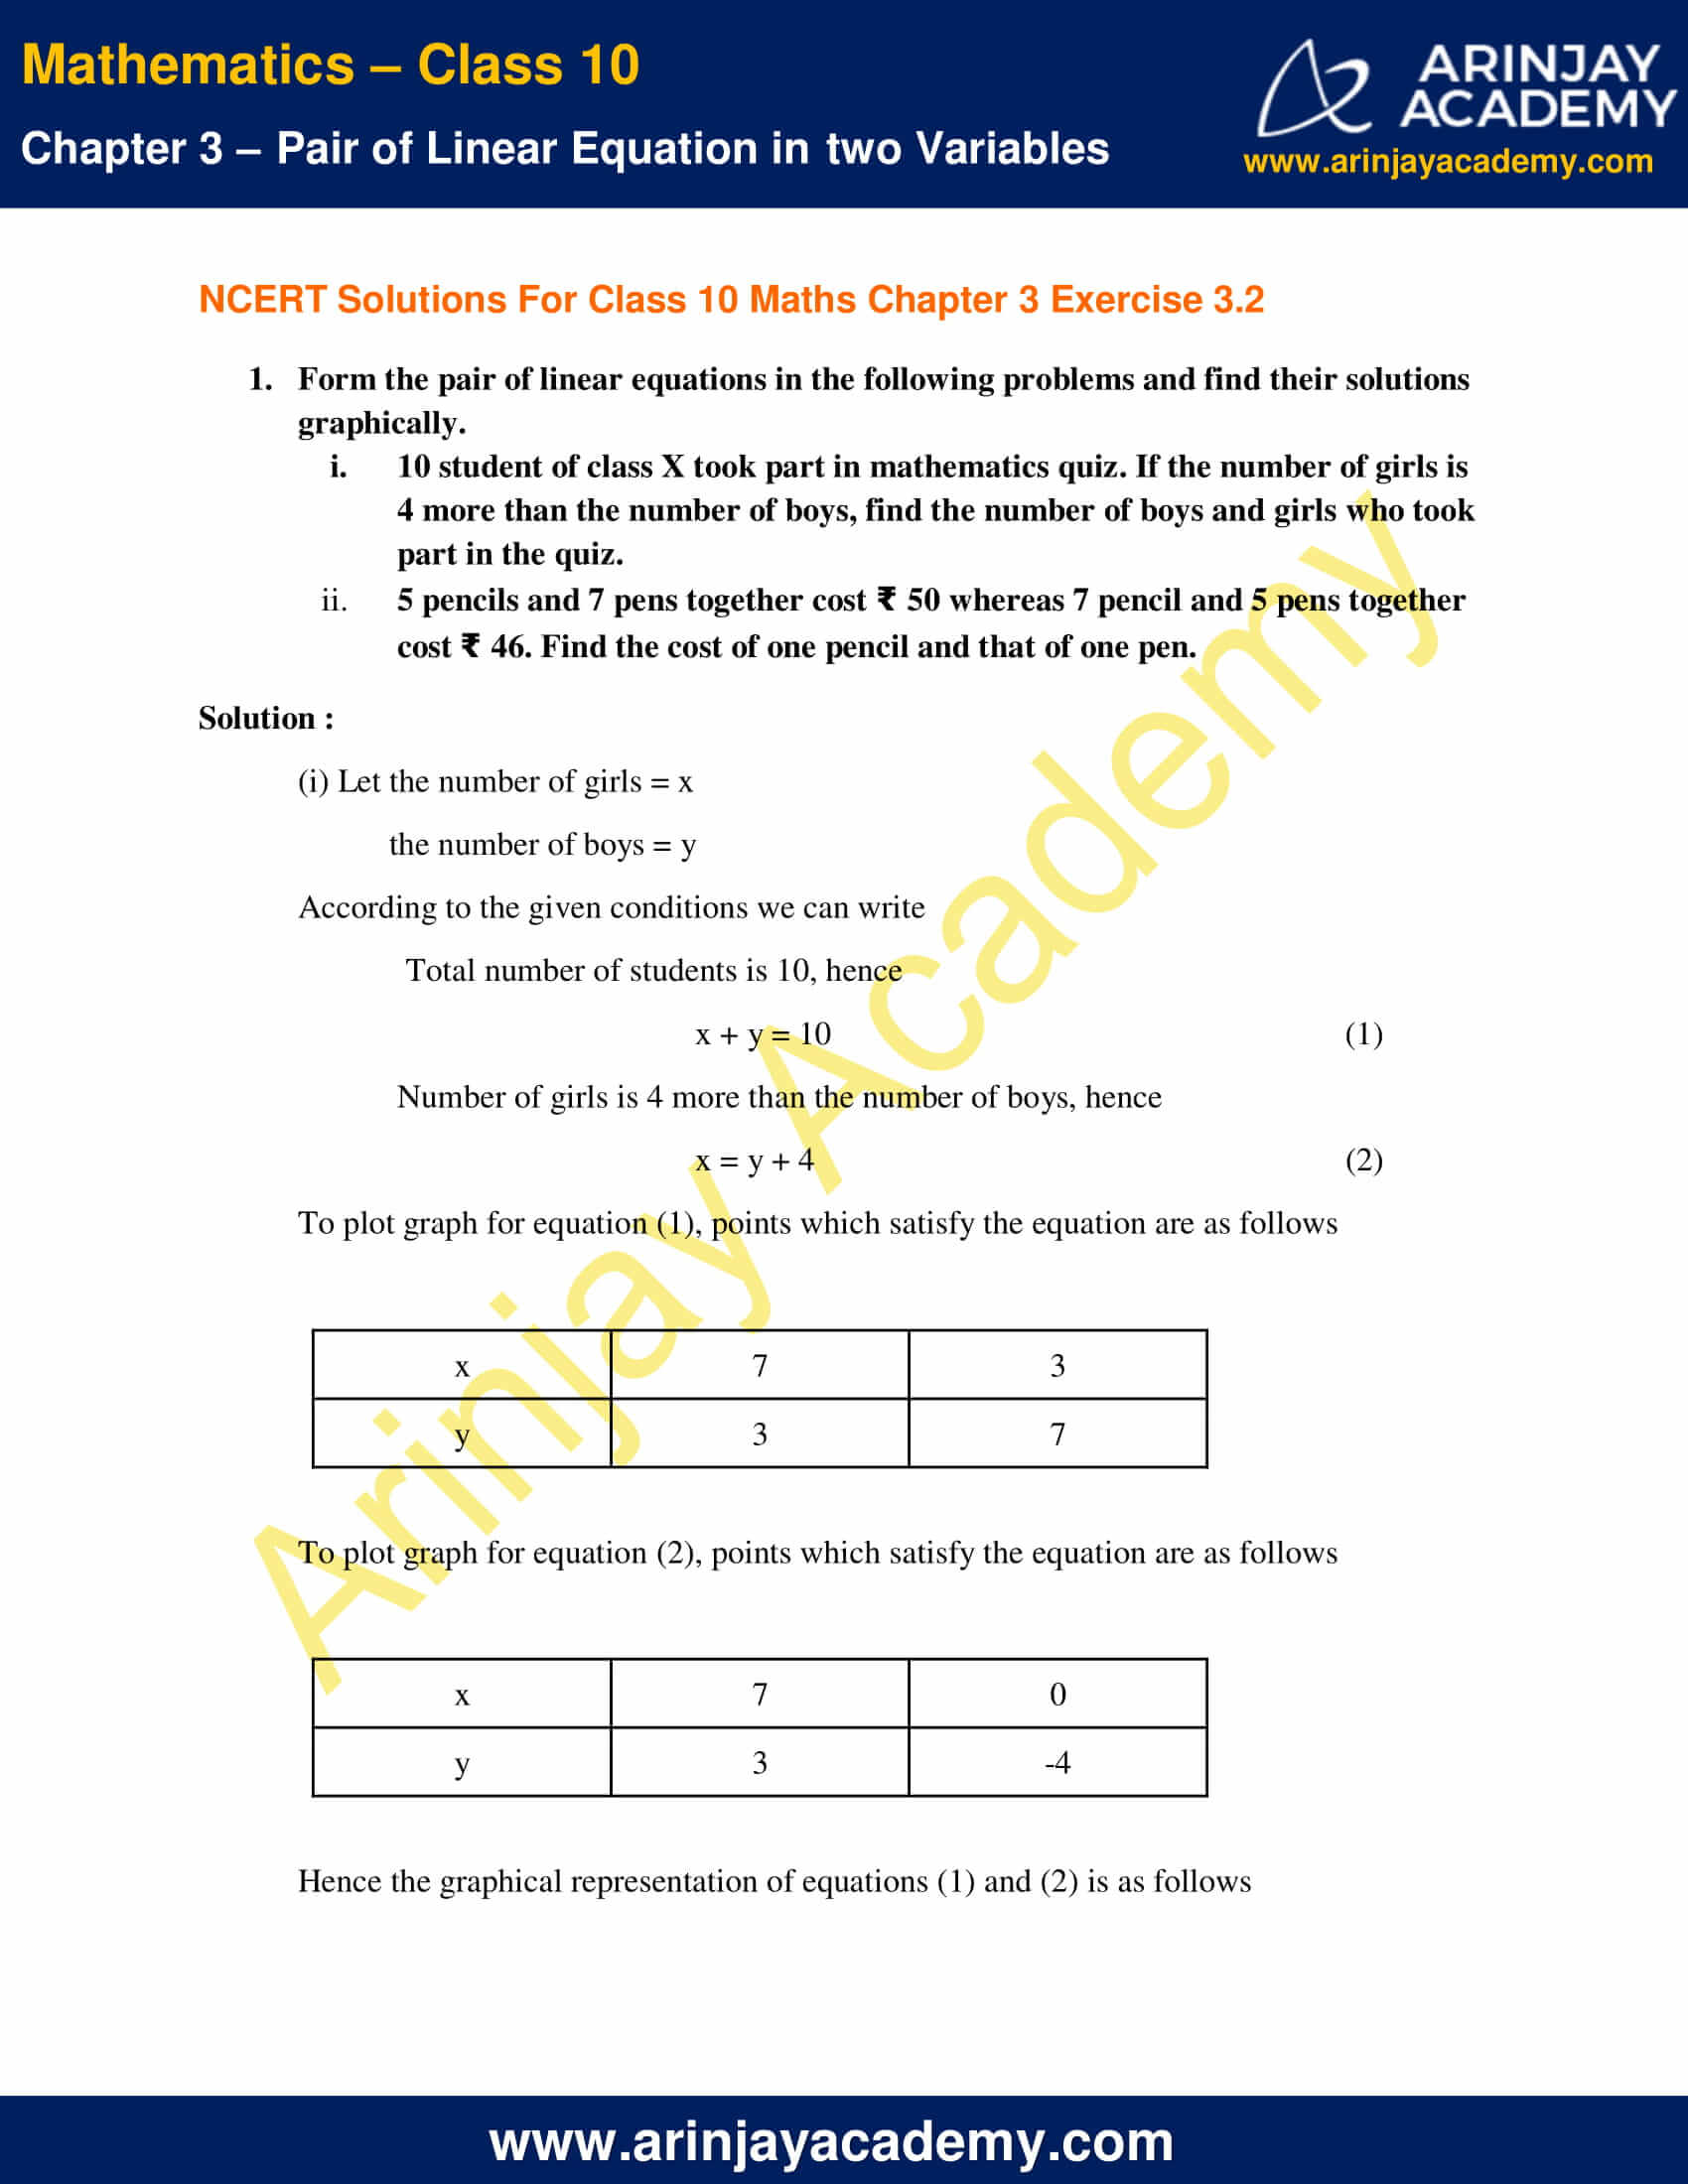 NCERT Solutions For Class 10 Maths Chapter 3 Exercise 3.2 image 1